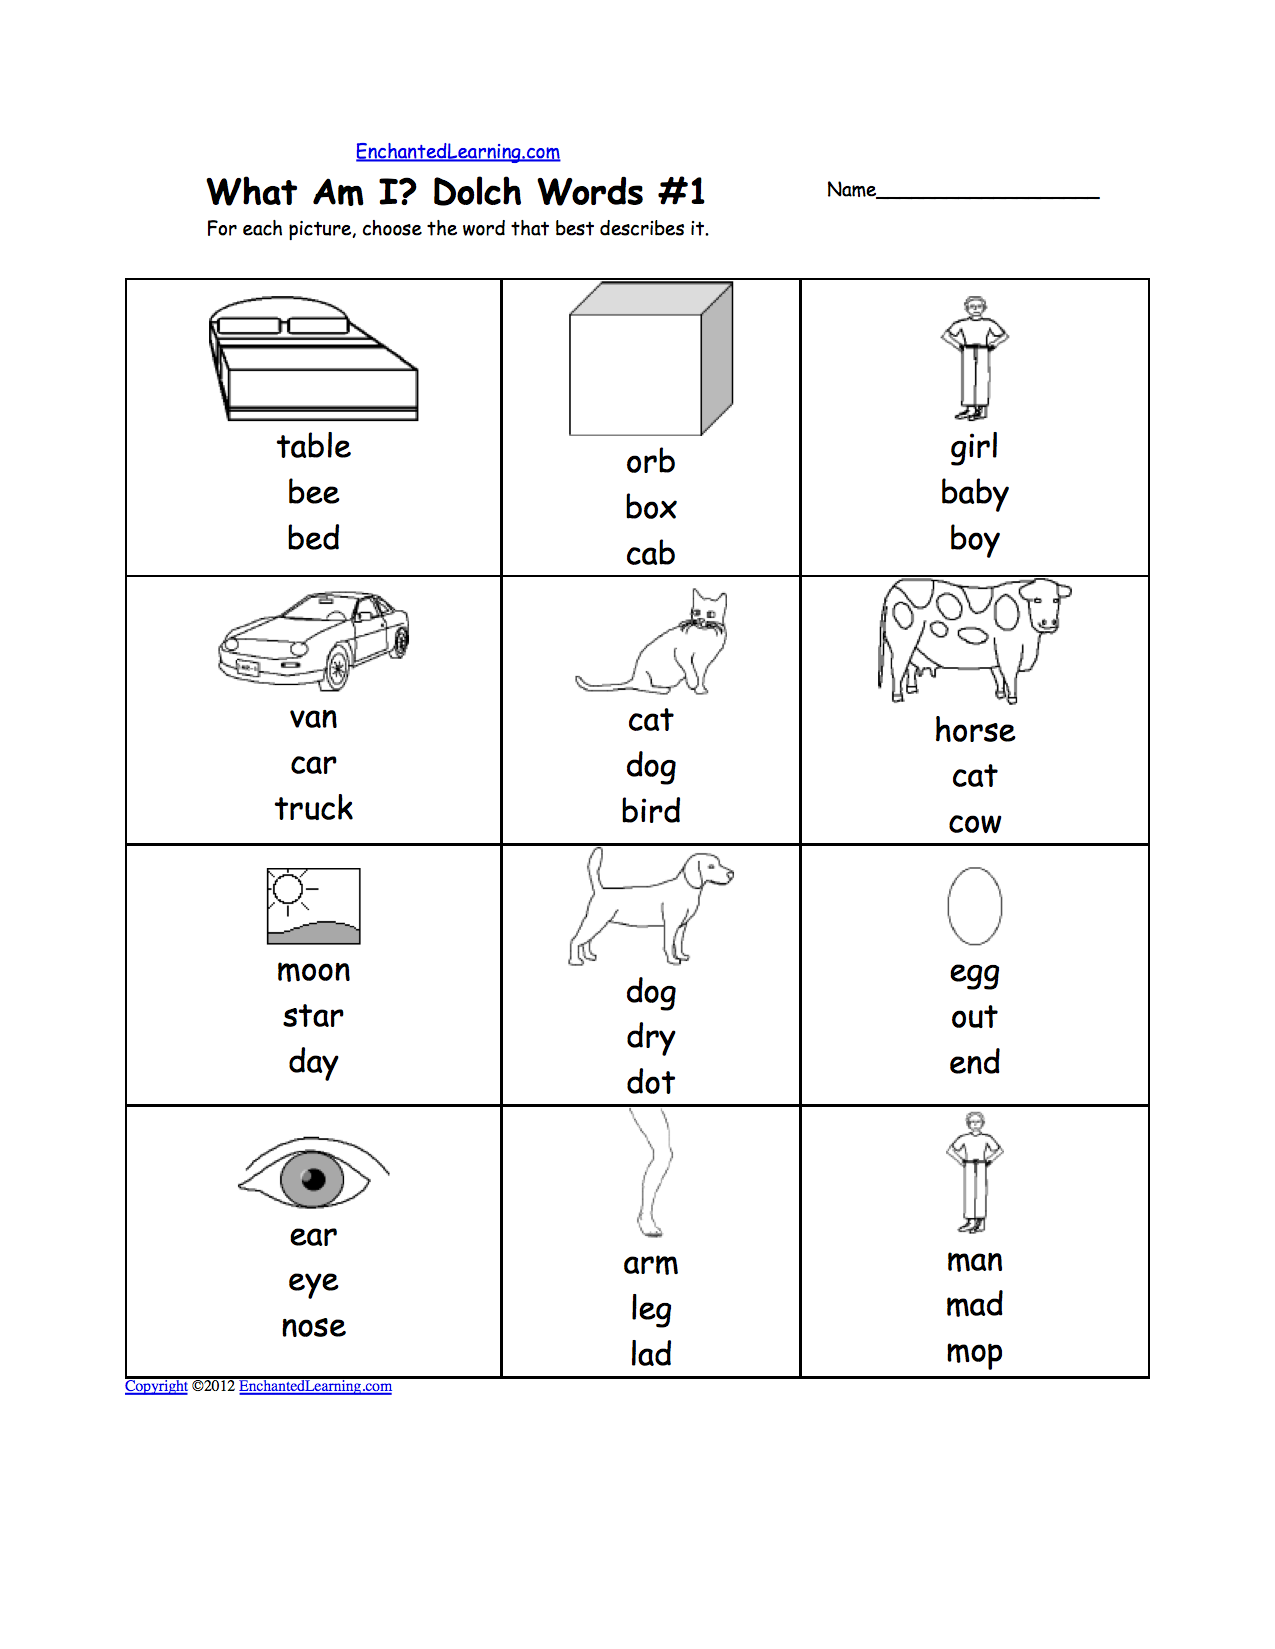 Search result: 'What am I? Dolch Nouns Worksheet Printouts'